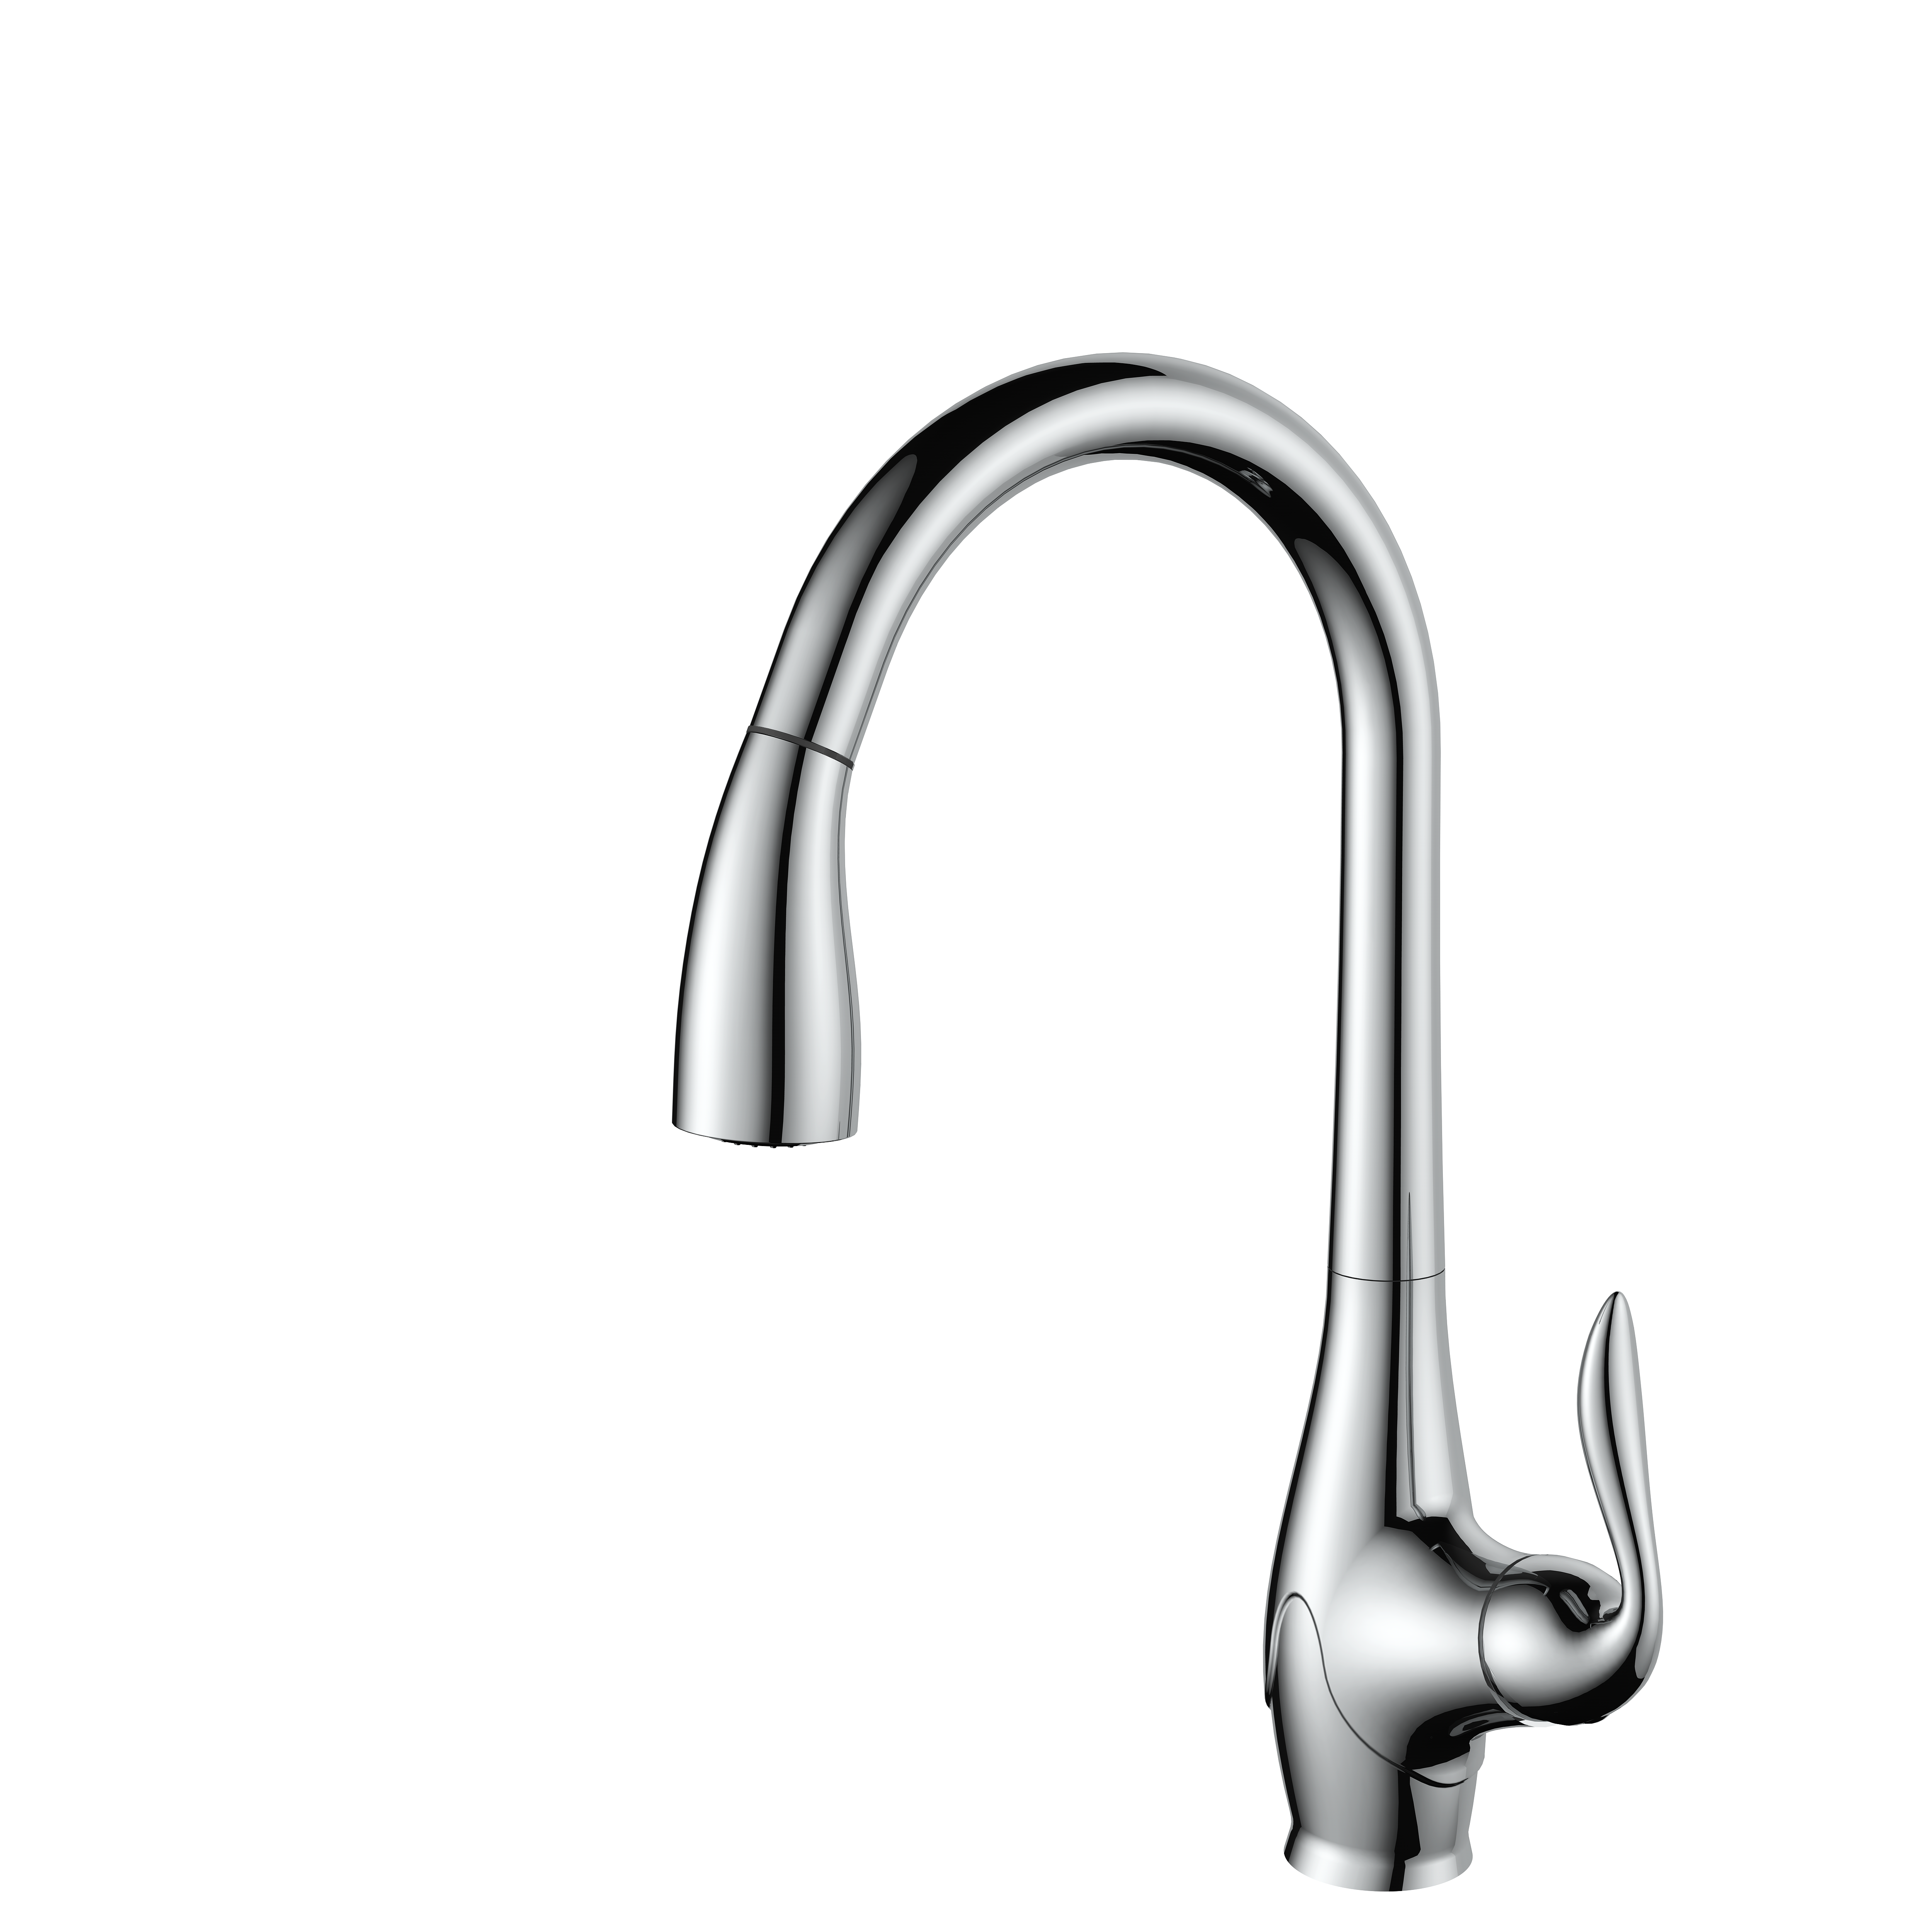 G02 New Design Black Taps Kitchen Faucet Pull Out Gold Long Neck Kitchen Faucet with Pull Down Sprayer